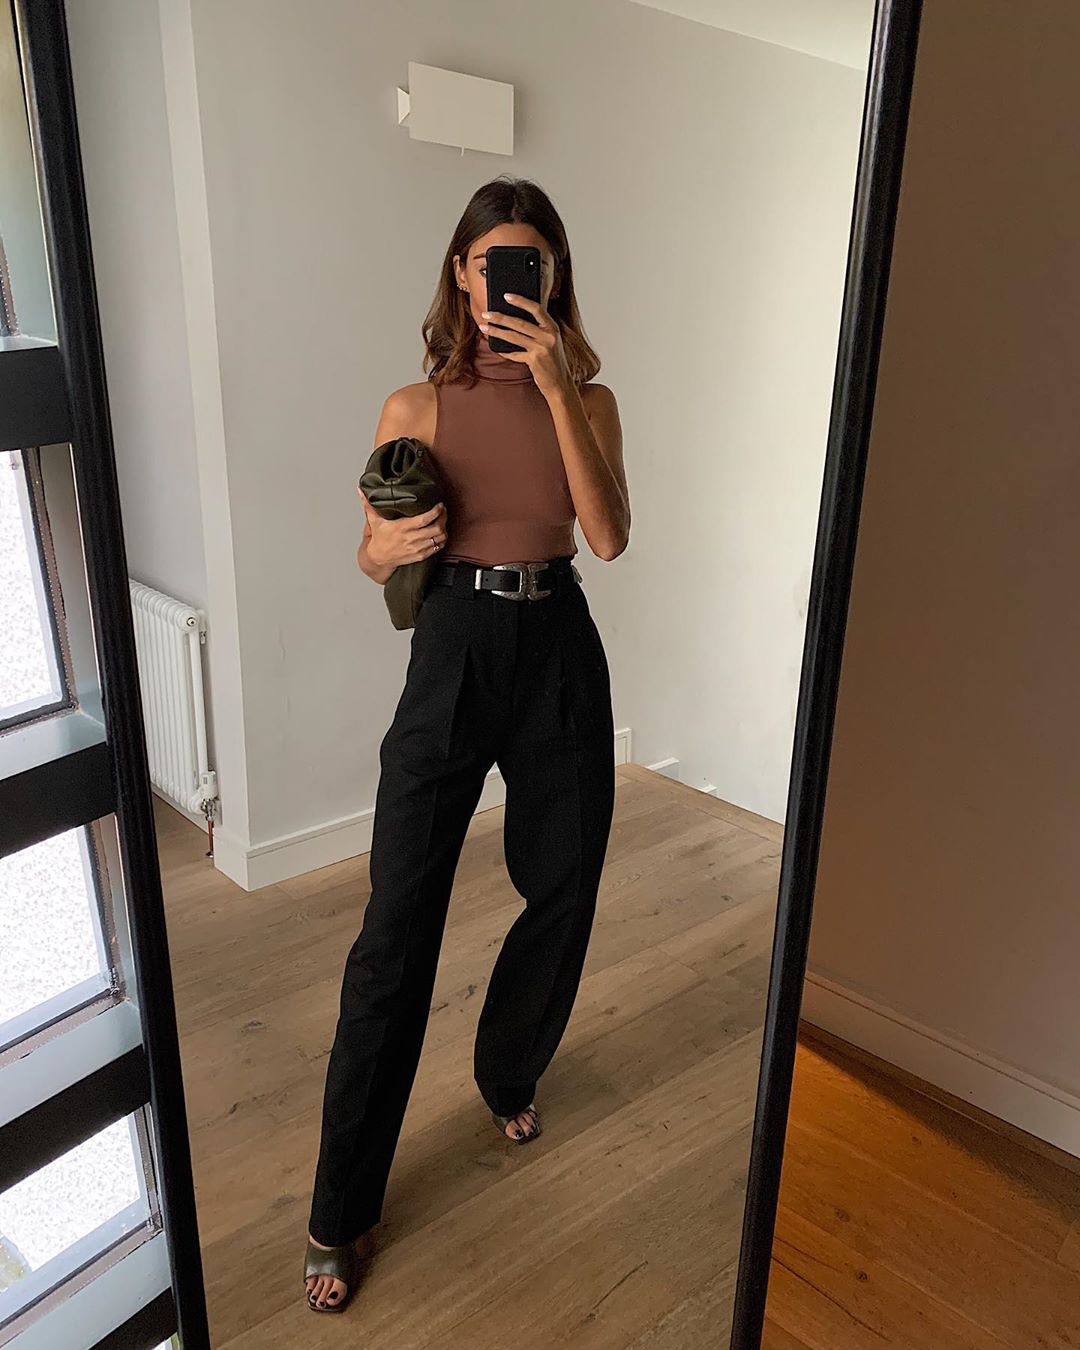 @smythsisters Instagram outfit idea — brown sleeveless turtleneck top, belt, high-waisted pants, black pouch clutch, and black mule heel sandals